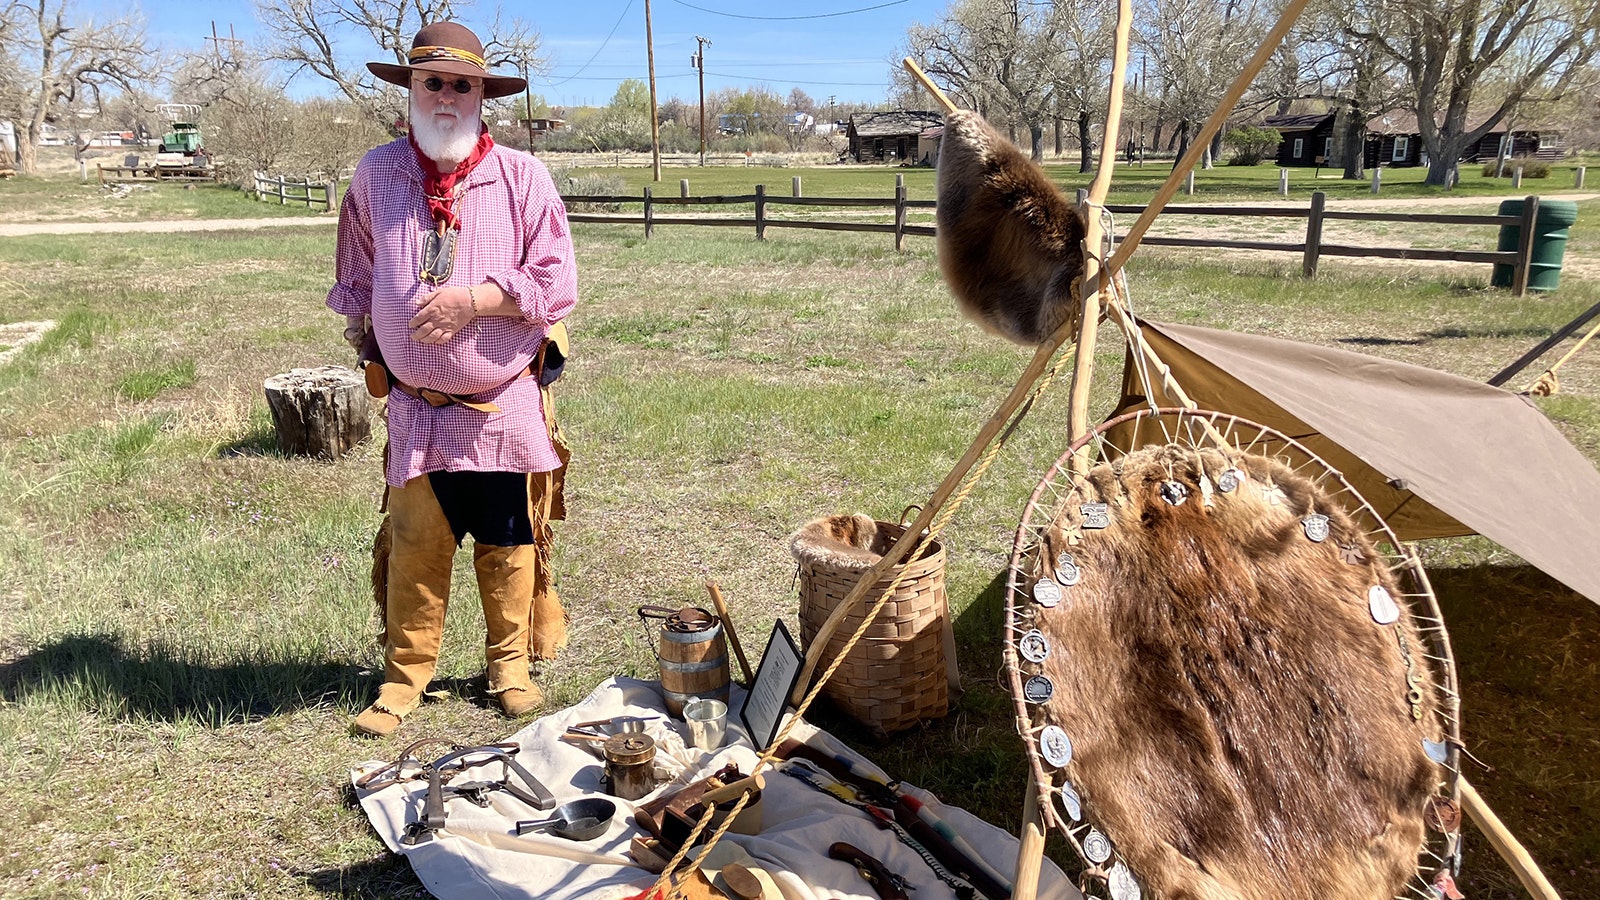 Dale Gregory of Casper enjoys reenacting the life of a mountain man at an annual rendezvous.